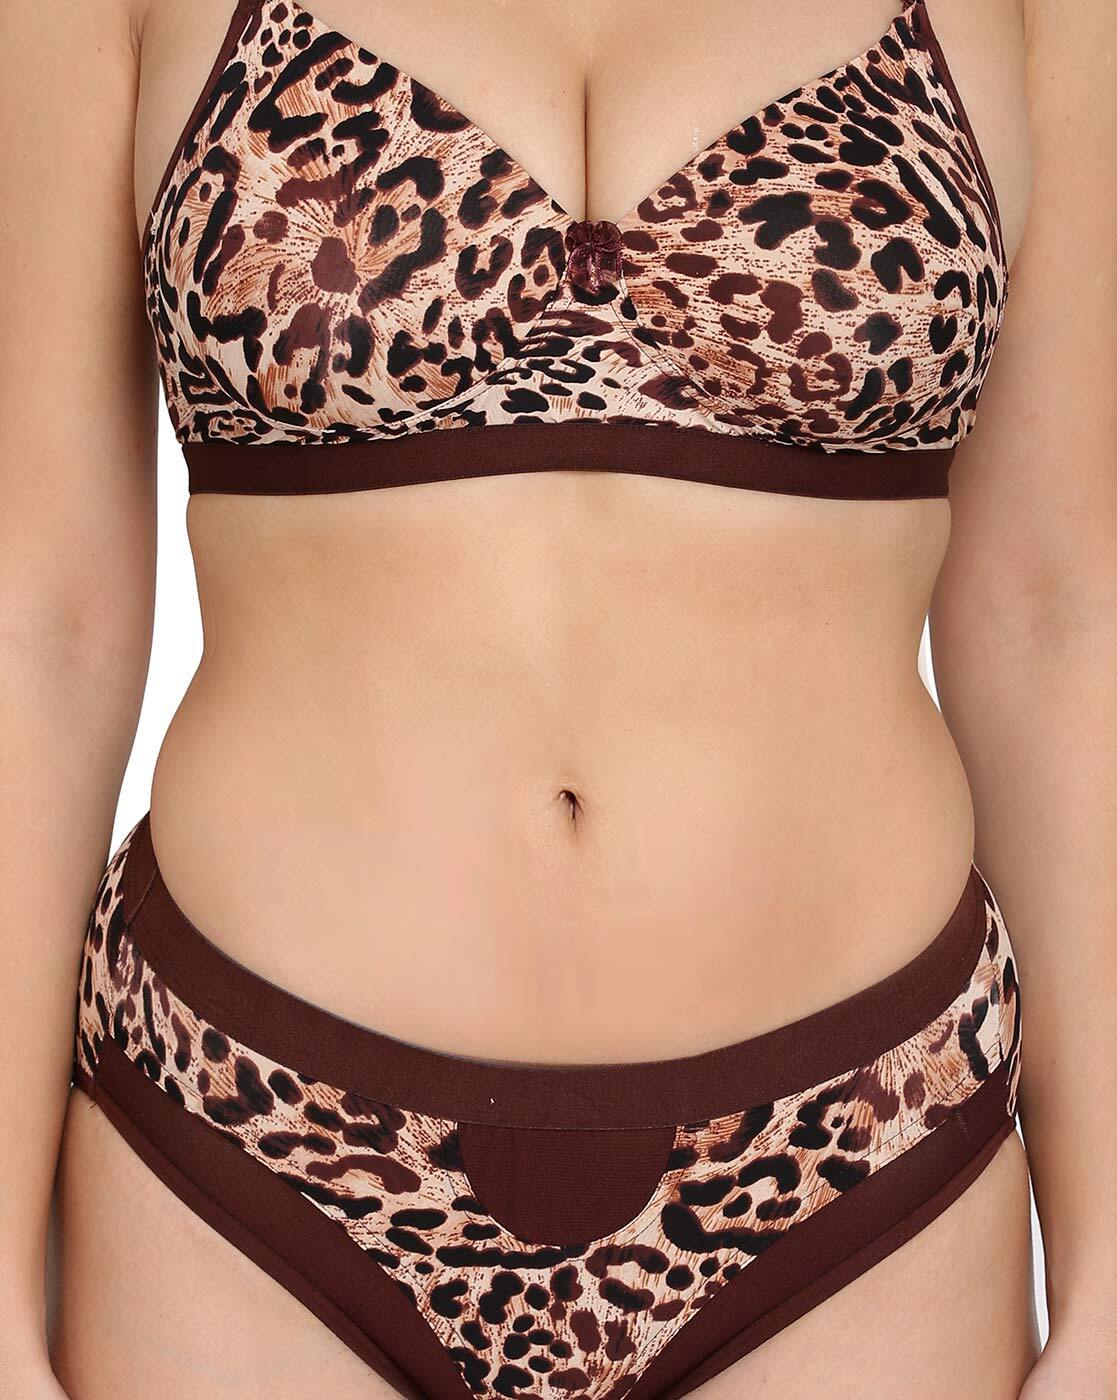 curtis sharpe recommends Cheetah Print Bra And Panties